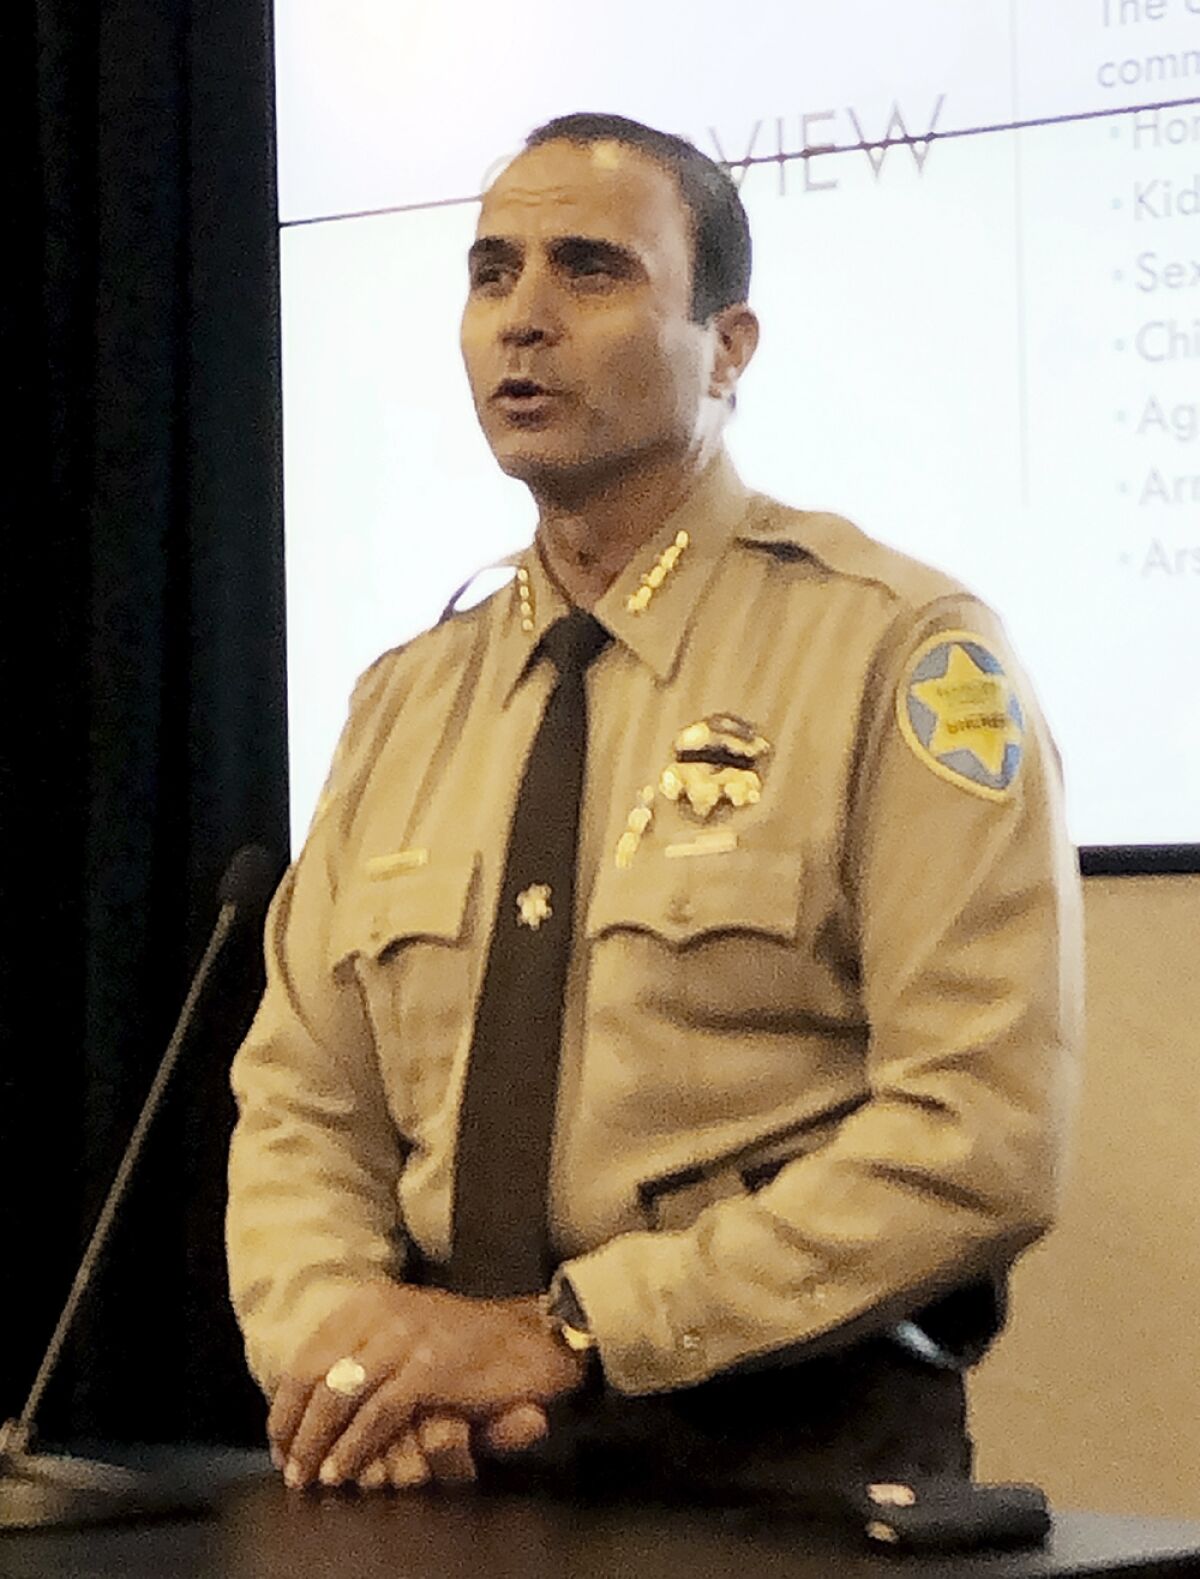 Maricopa County Sheriff Paul Penzone is shown at an Aug. 12, 2020, news conference at his office in Phoenix. A court-appointed official has criticized Penzone's efforts to reduce a backlog of 1,800 internal affairs case against his officers and complained the sheriff hasn't heeded his team's suggestions for chipping away at the backlog. (AP Photo/Jacques Billeaud)